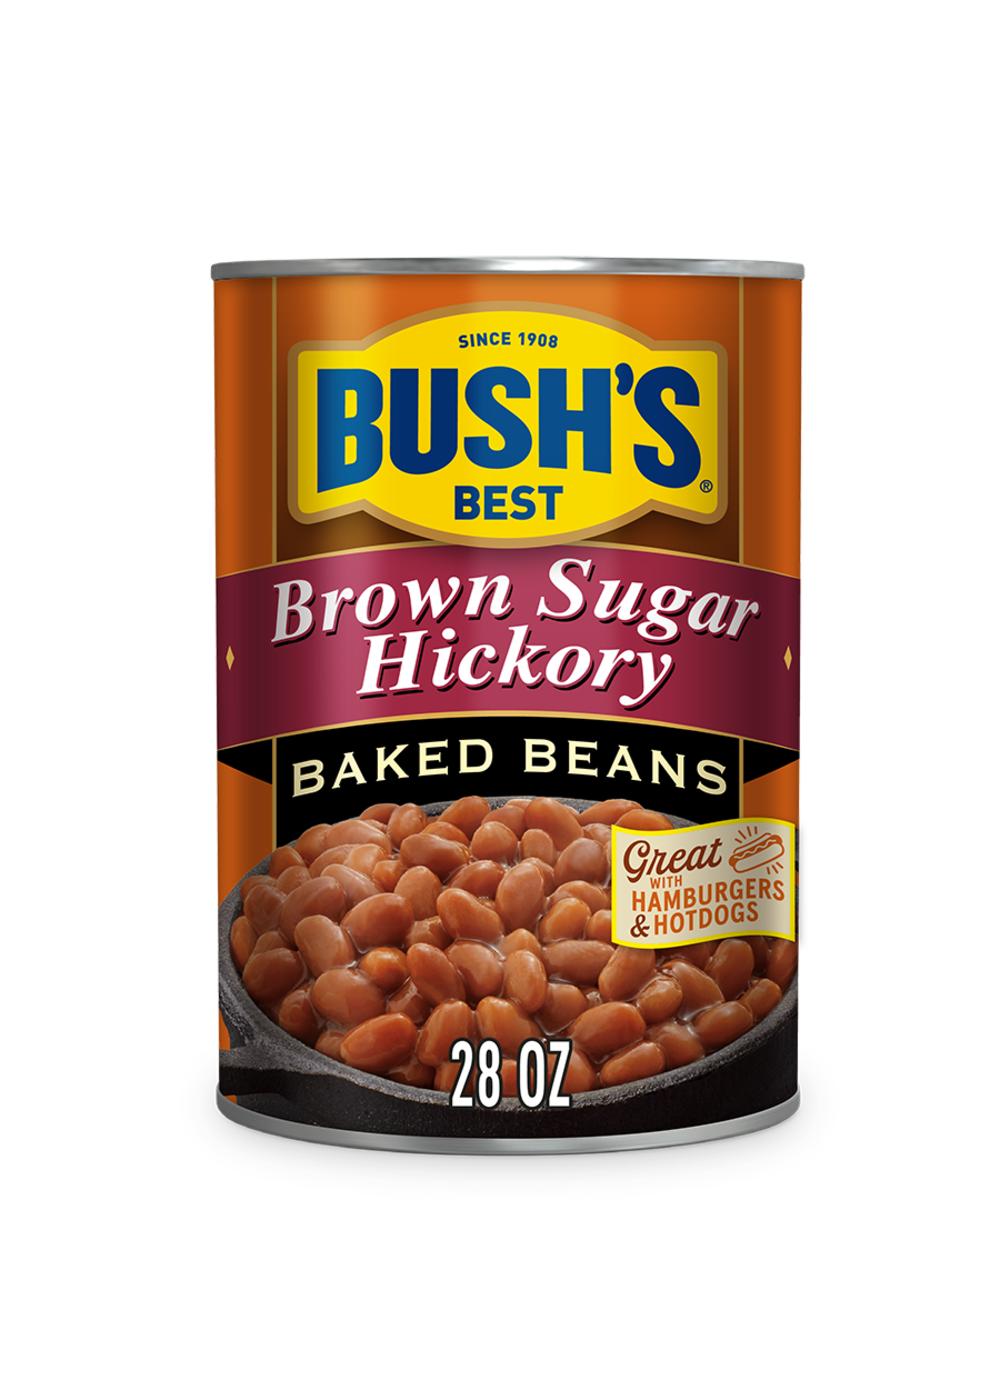 Bush's Best Brown Sugar Hickory Baked Beans; image 1 of 3